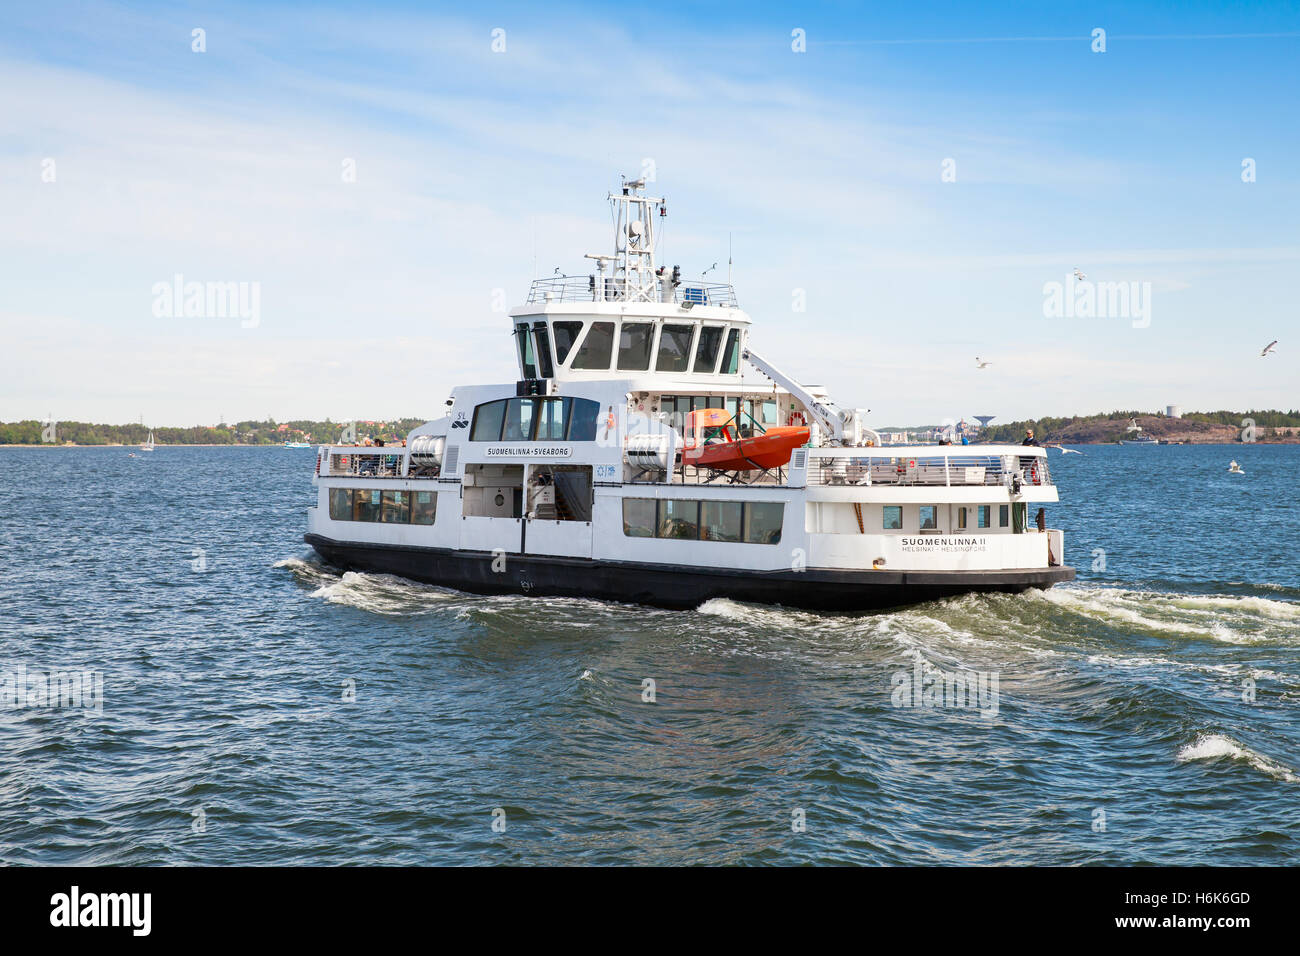 Helsinki, Finland - June 13, 2015: Passenger ferry Suomenlinna II with many tourists on board. This ferry travels from Helsinki Stock Photo